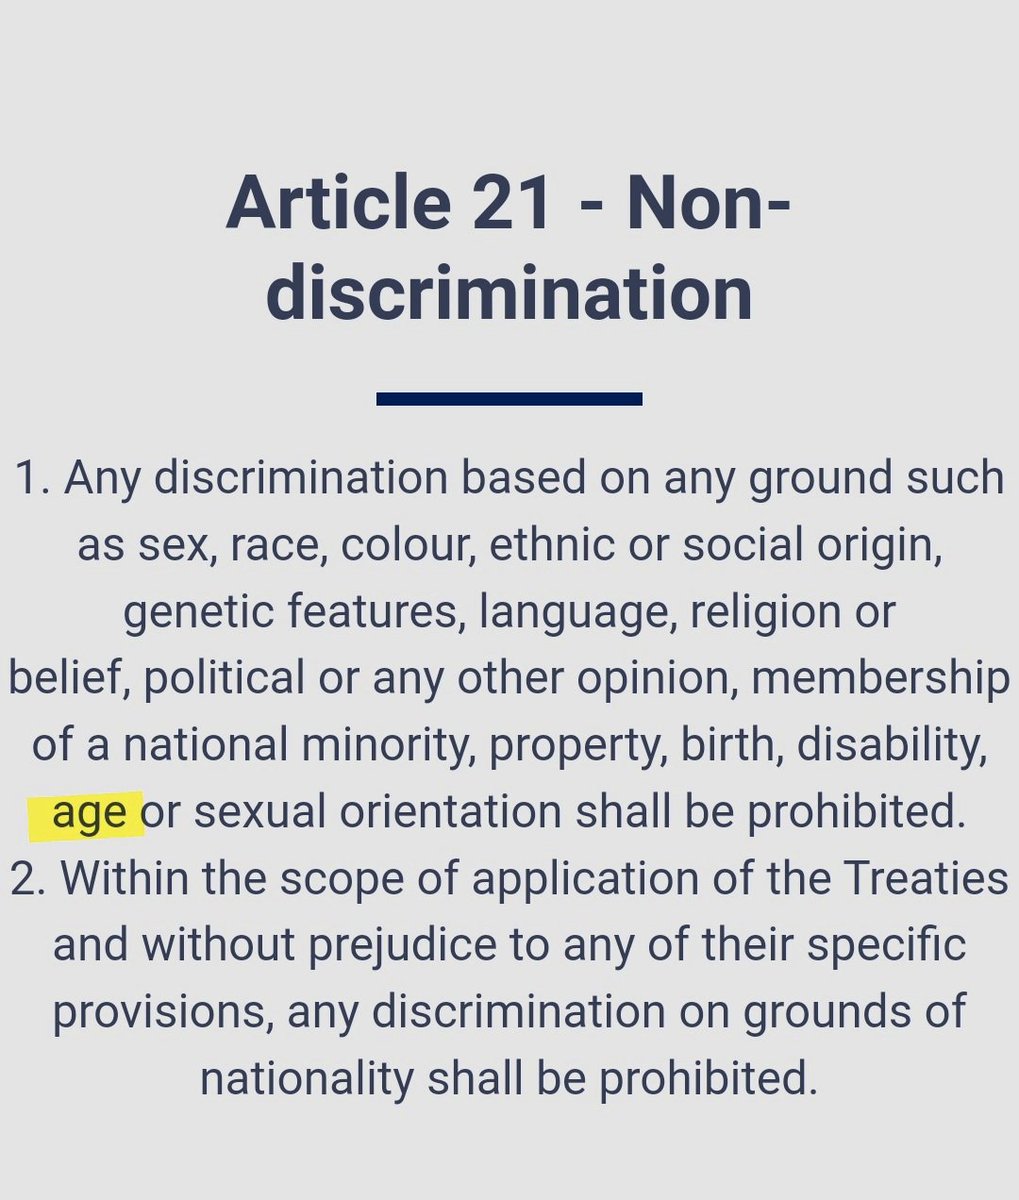 In case you missed it ... Offering preferential visa treatment to third-country nationals of only a *specific age* is surely discriminatory, and would presumably break any directives based on Article 21 of the EU's Charter of Fundamental Rights.